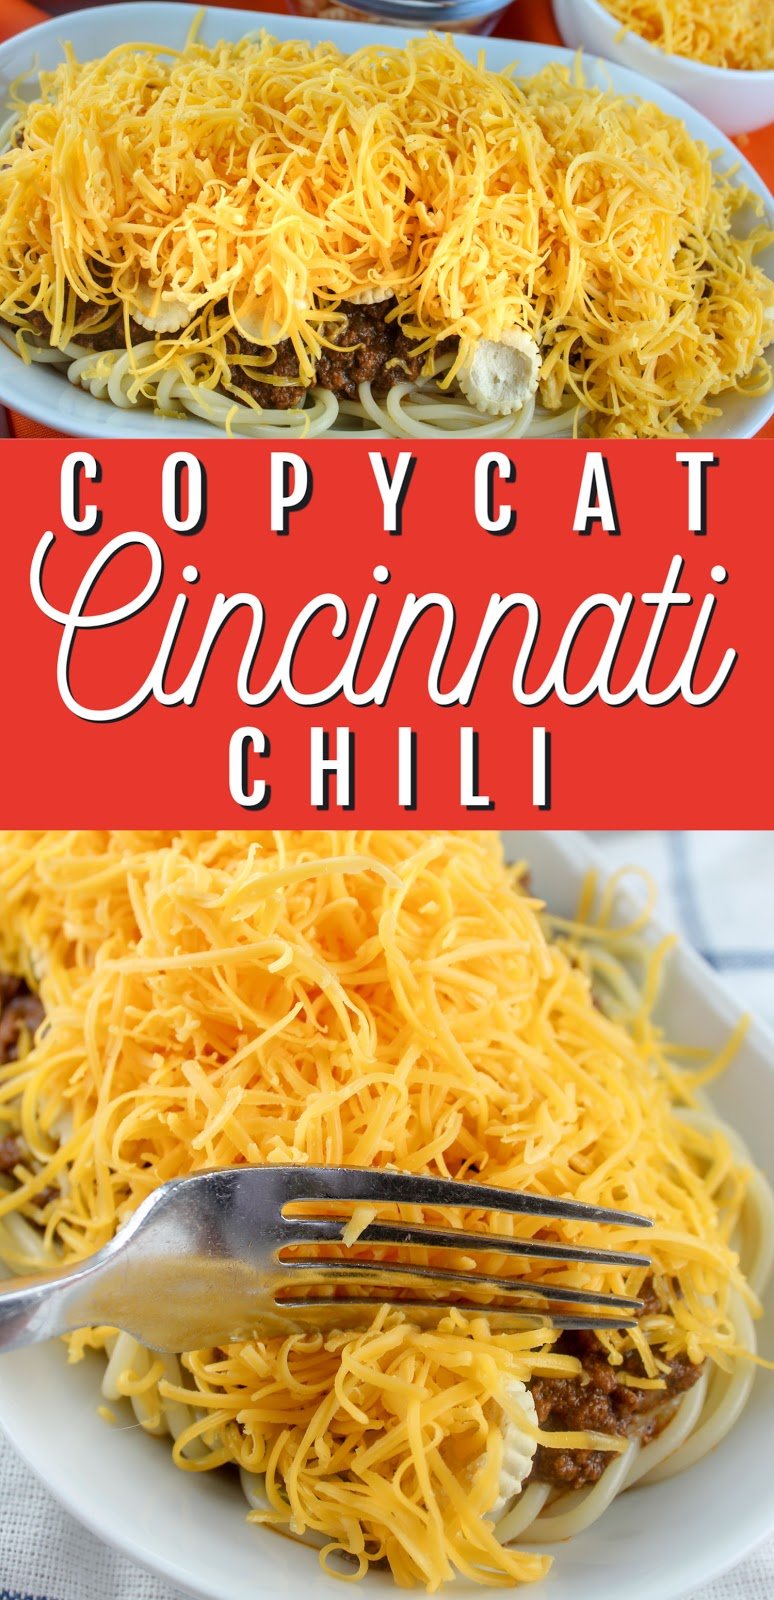 Cincinnati Chili is one of the most interesting dishes you’ll ever taste! It’s not like any chili you’ve ever had – with cinnamon, cocoa powder and tons of other spice – it’s served on spaghetti with a whole lotta cheese! I love it!
 via @foodhussy